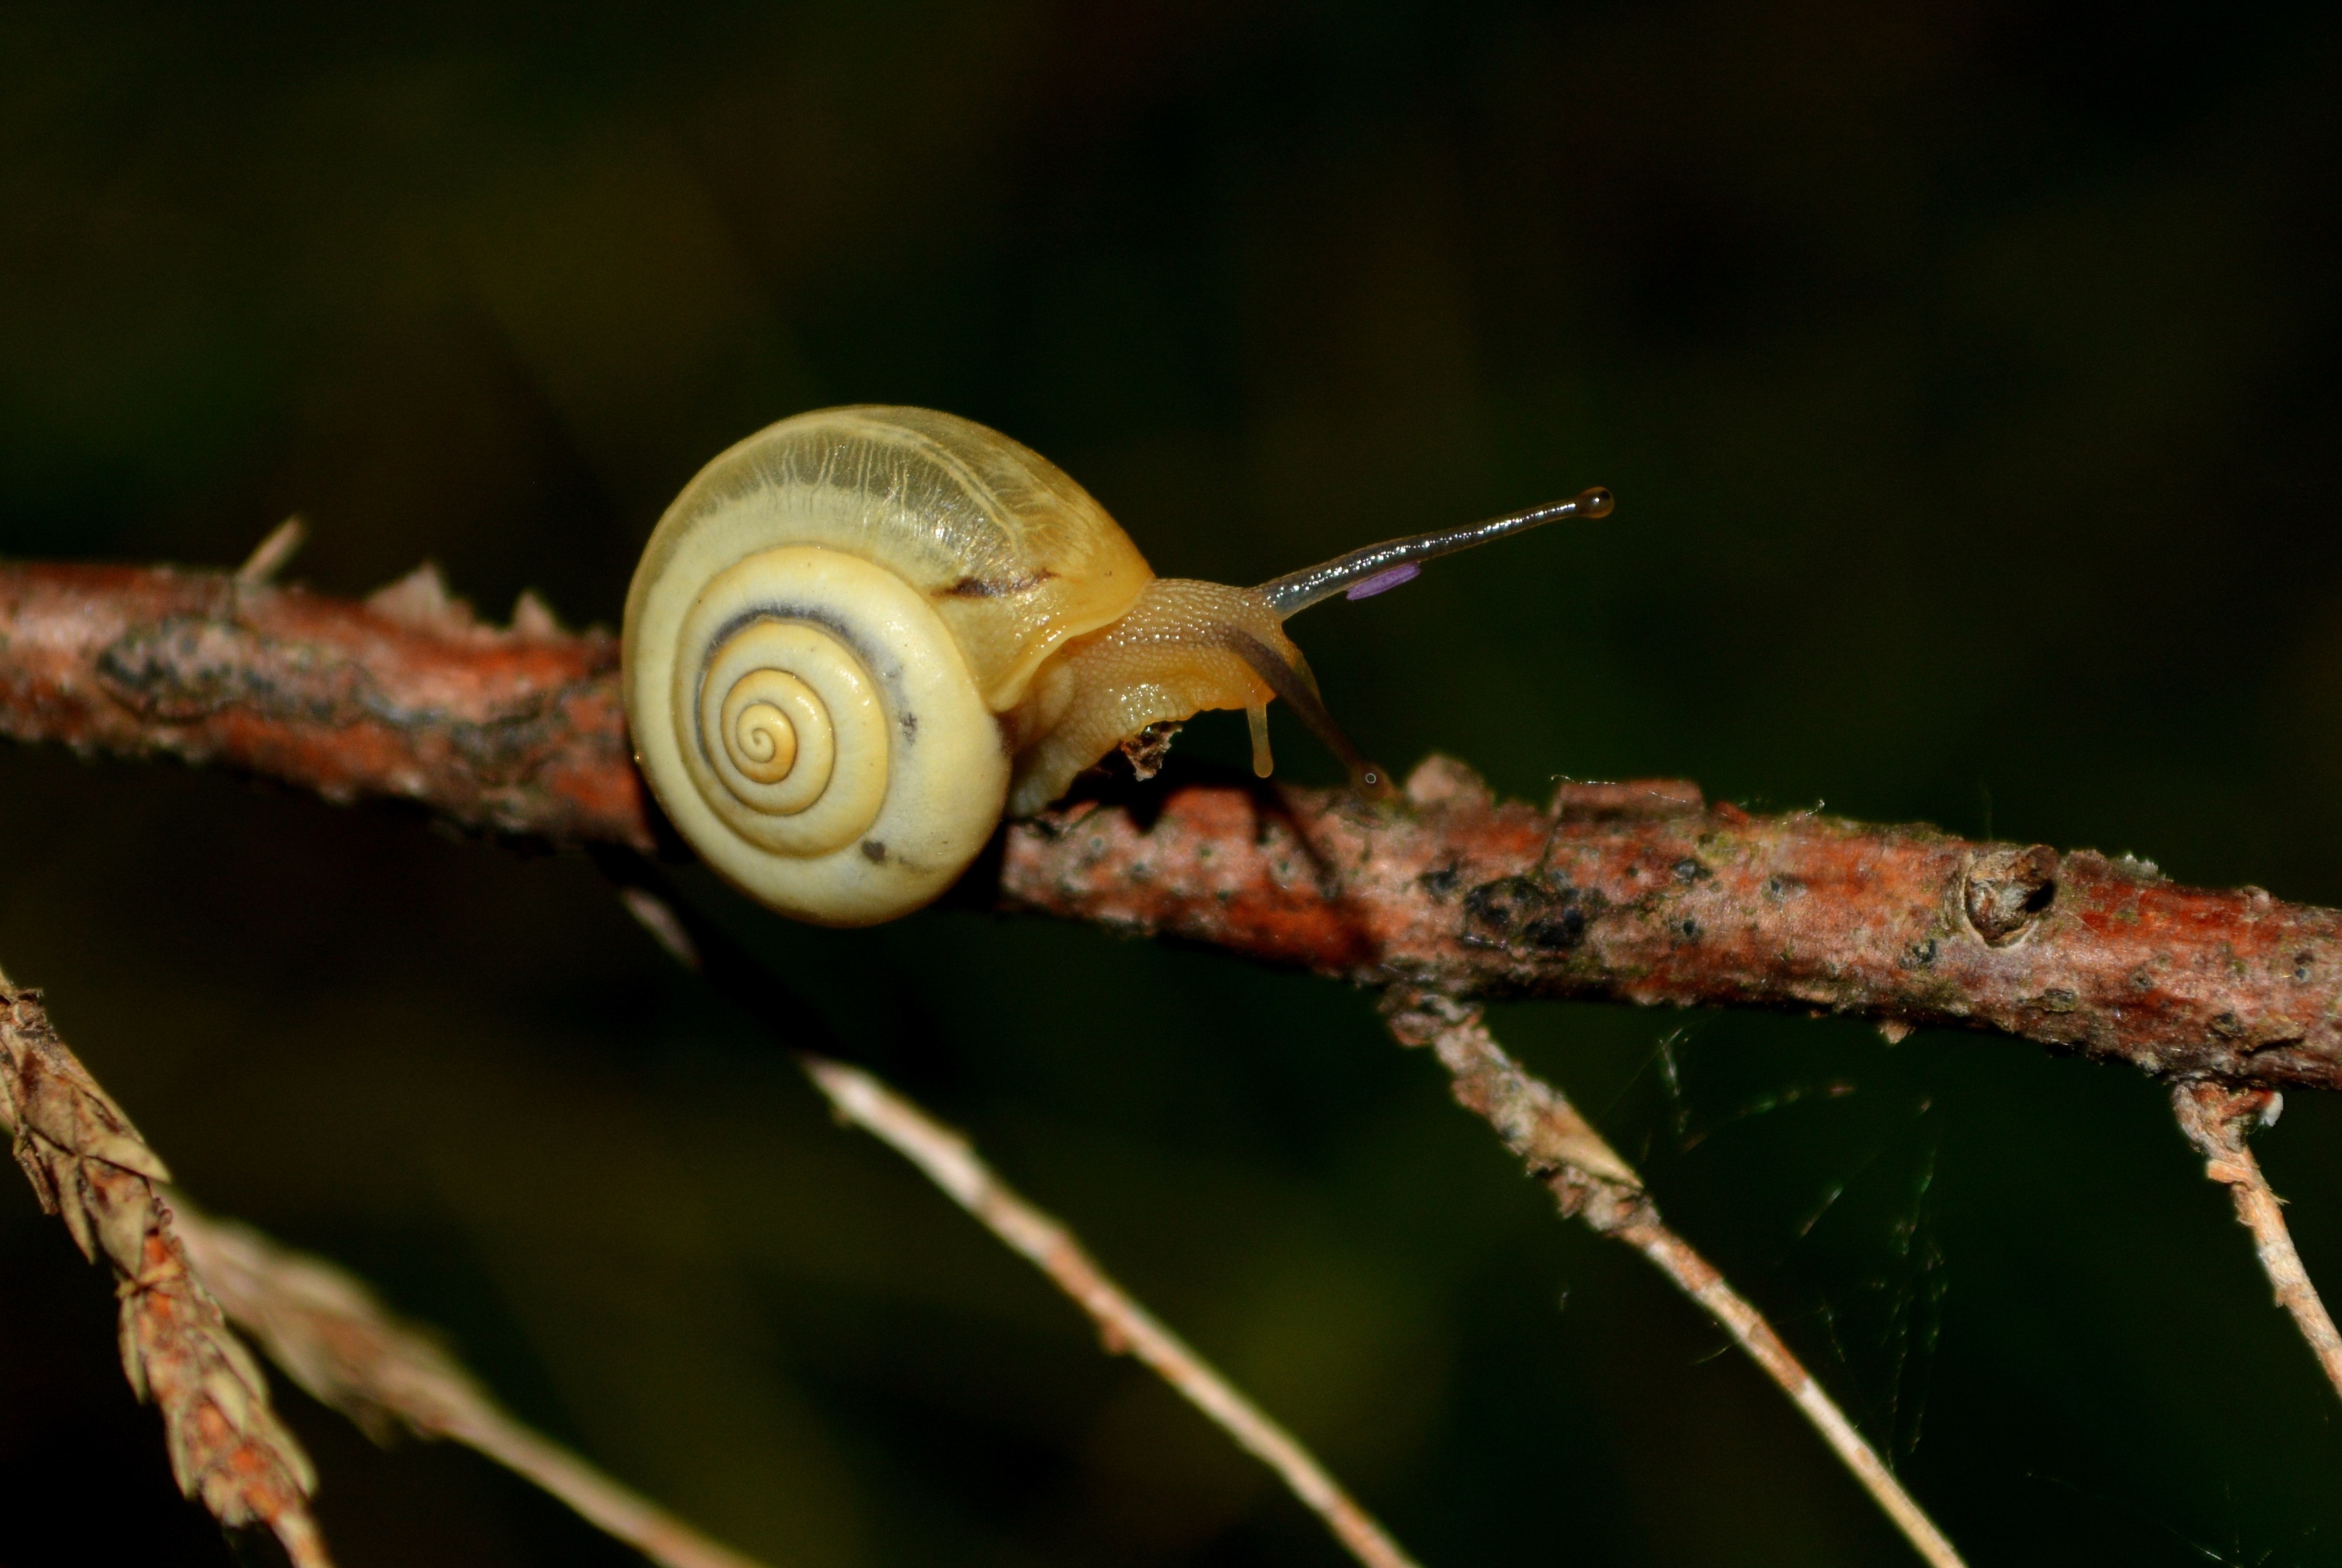 close up photo of snail on tree branch